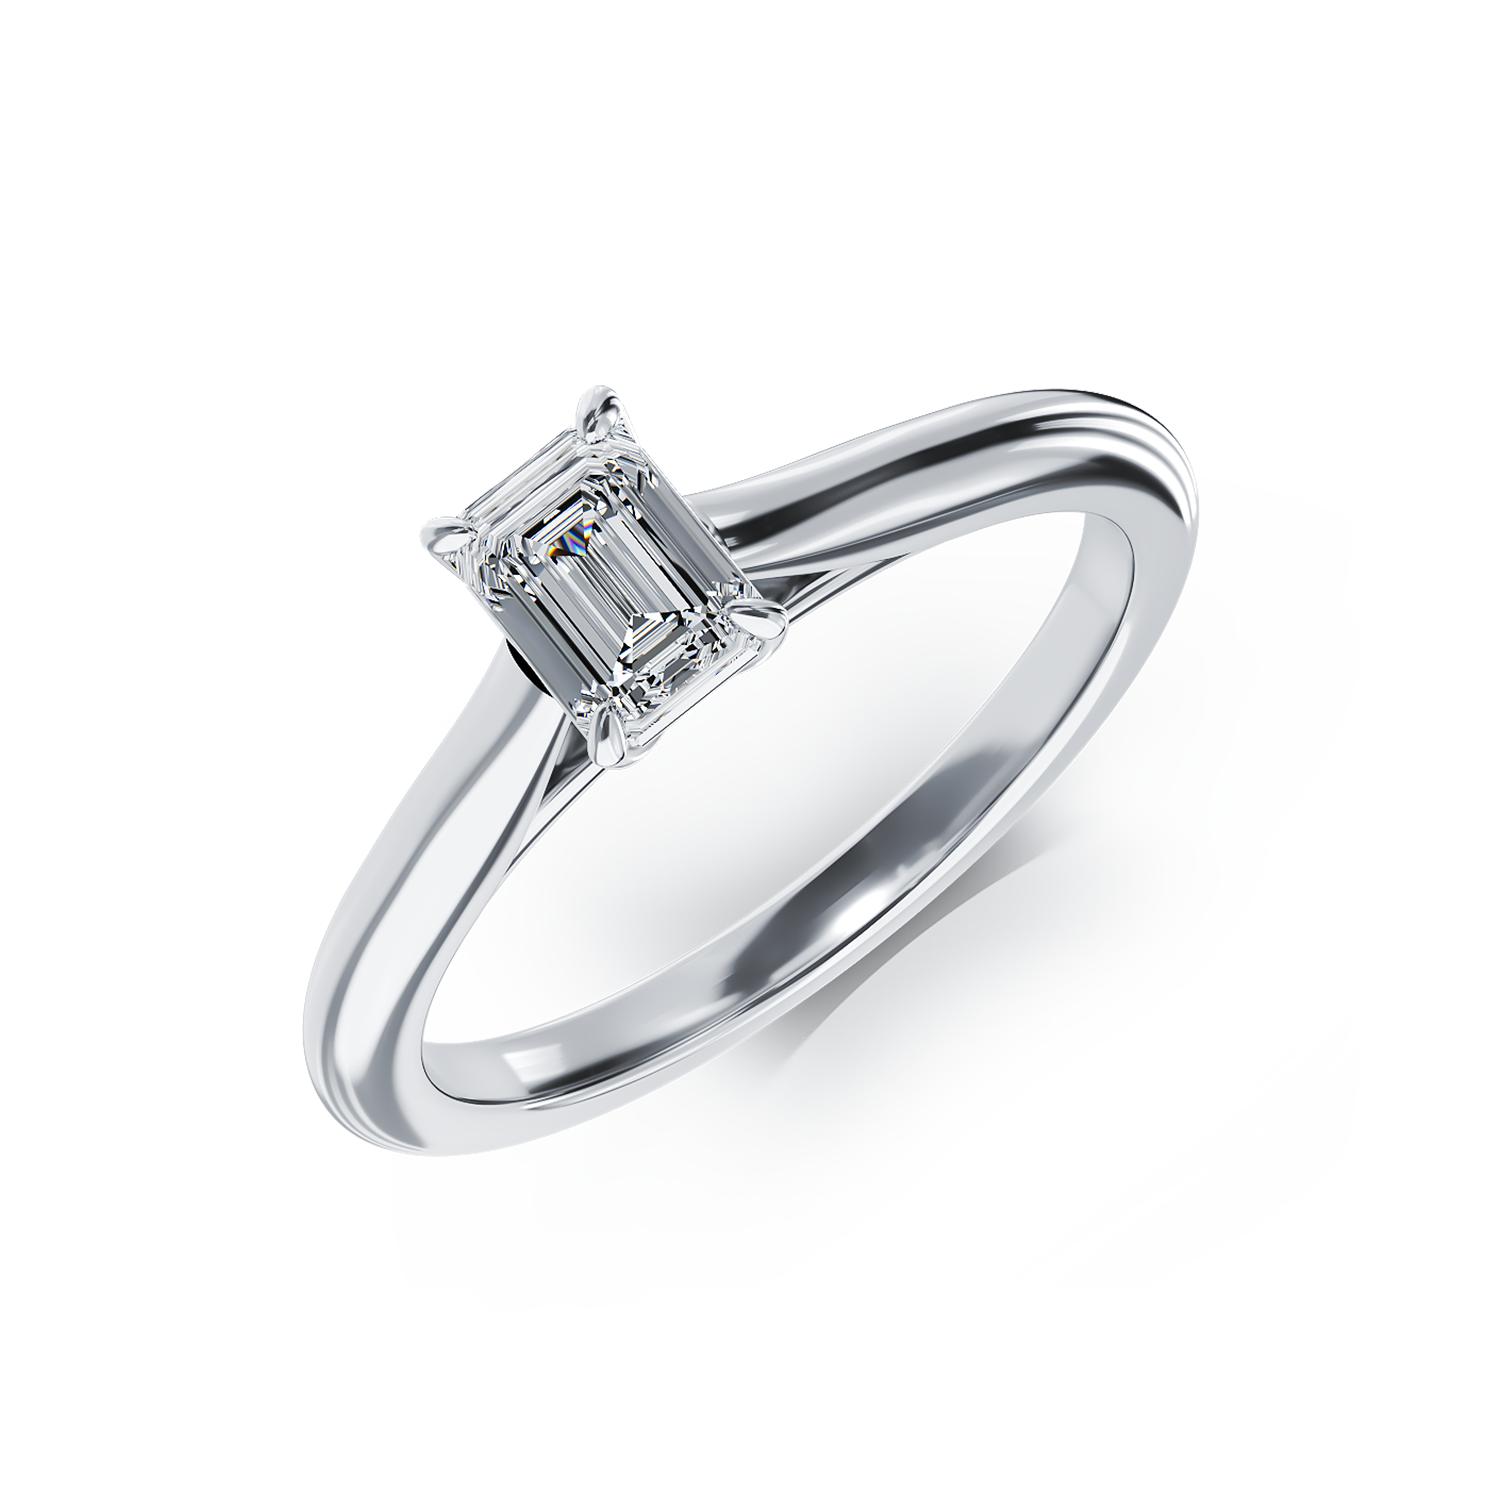 Platinum engagement ring with a 0.51ct solitaire diamond